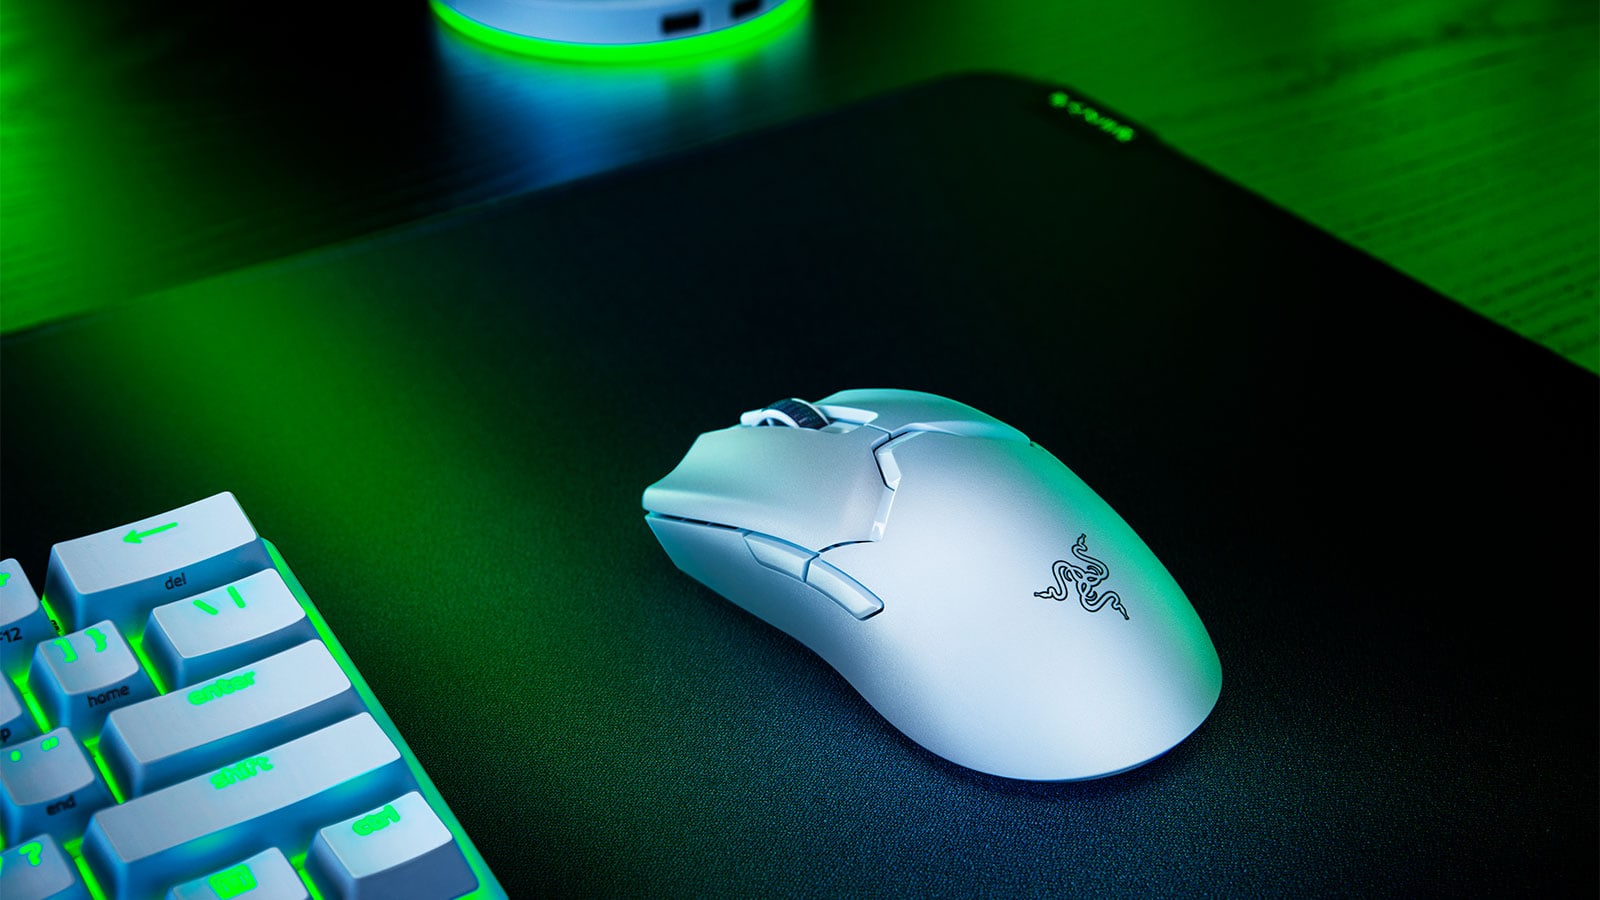 Razer Viper V2 Pro review: The new king of wireless gaming mice